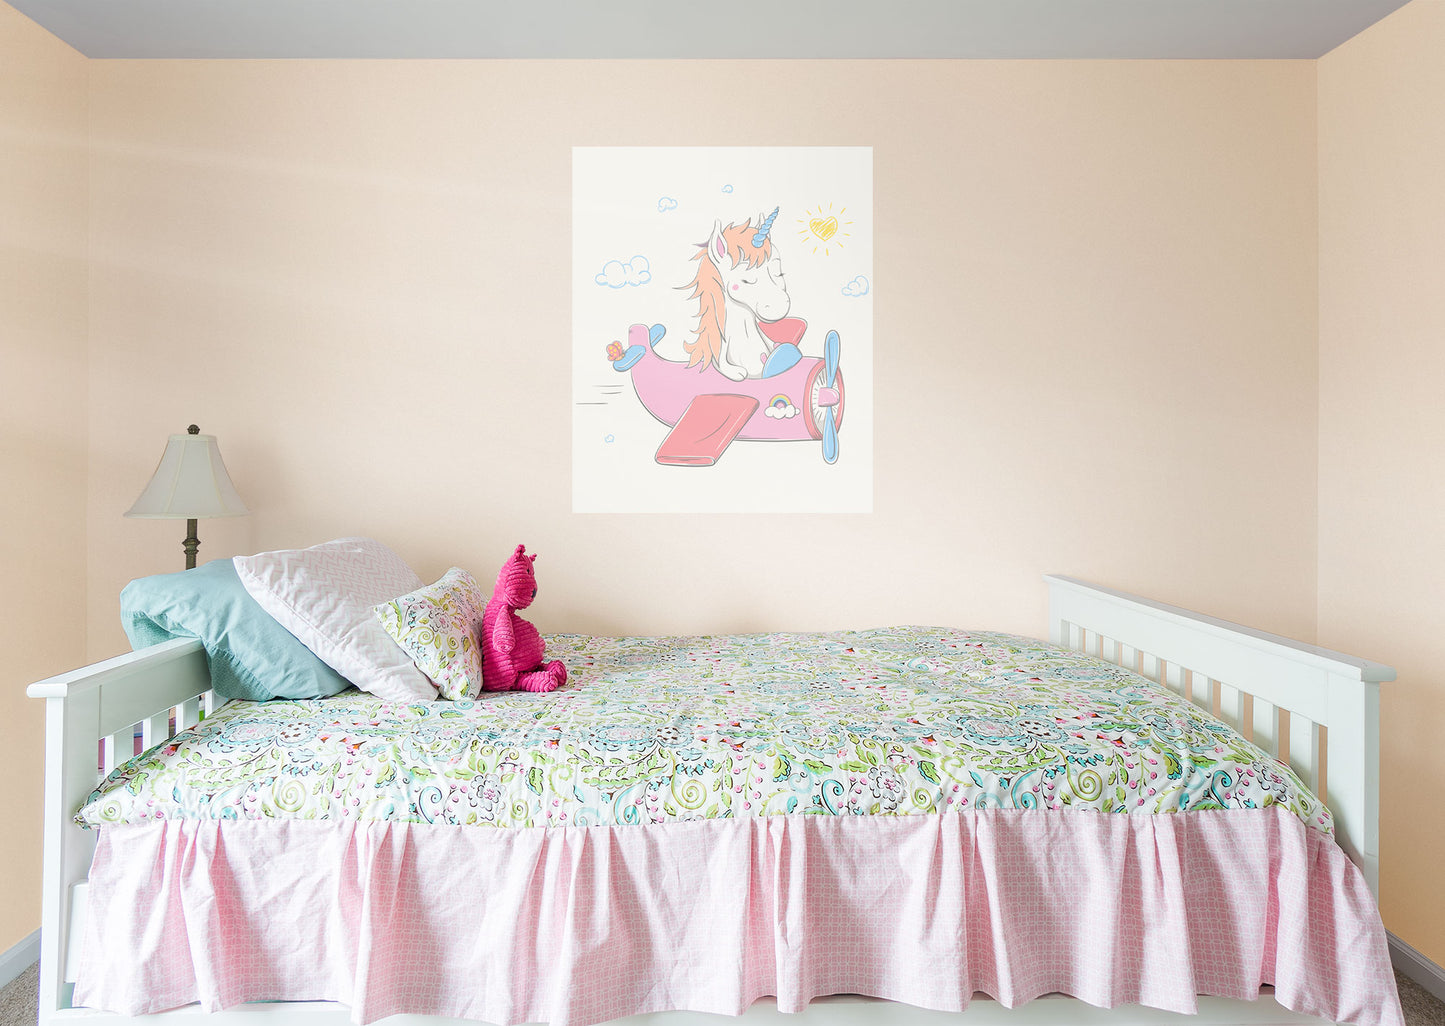 Nursery: Planes White Unicorn Mural        -   Removable Wall   Adhesive Decal